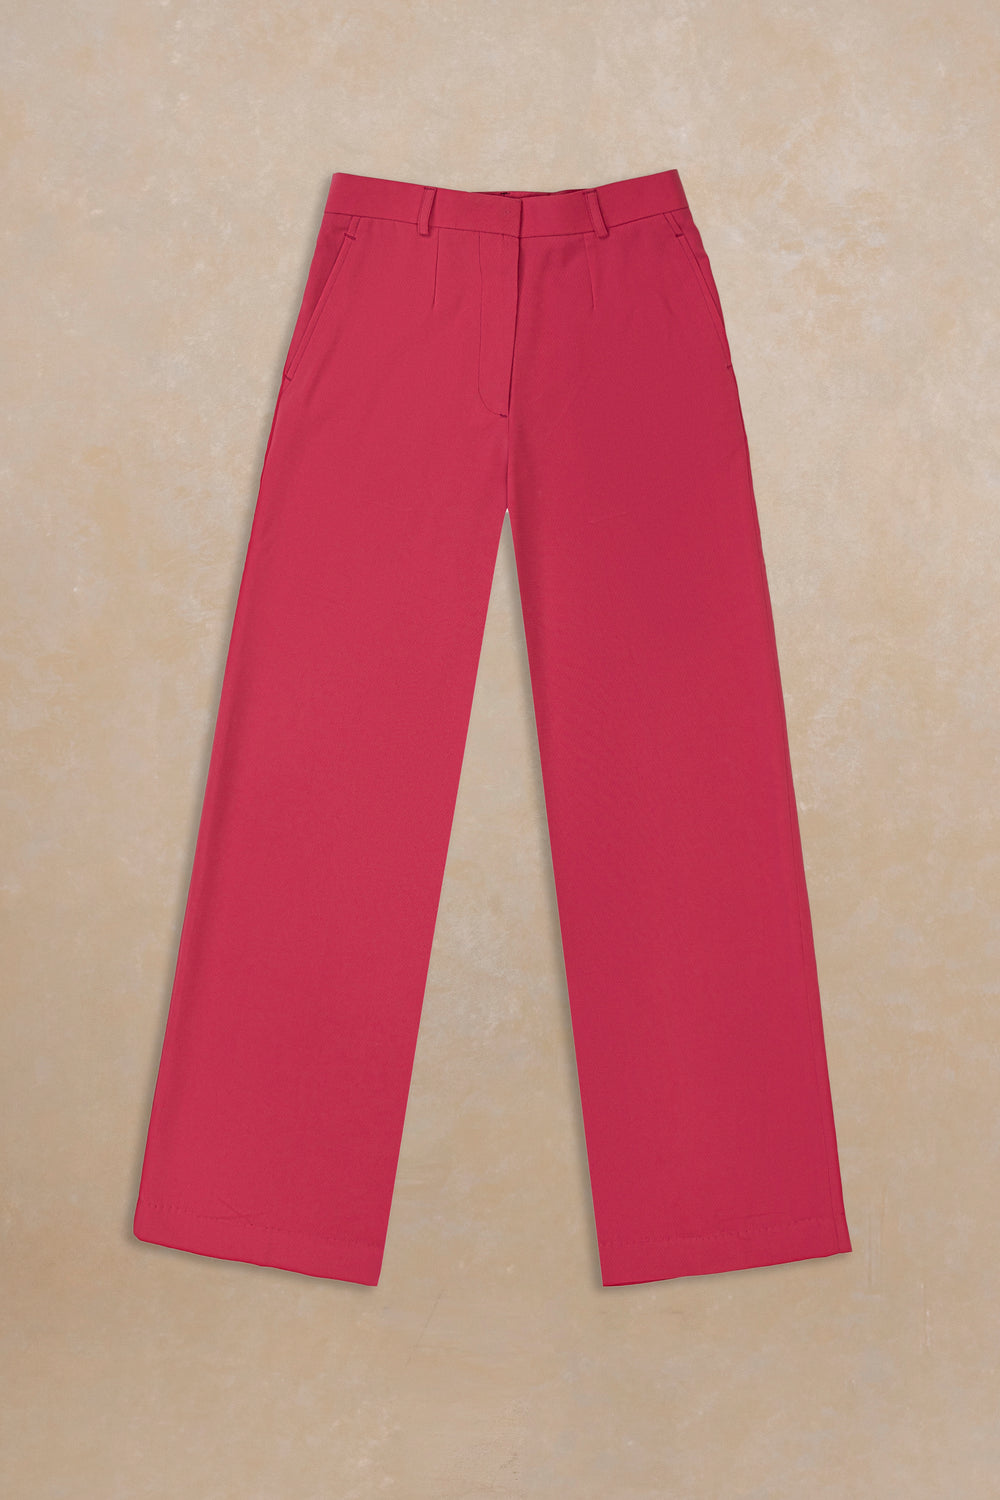 Hot Pink Palazzo Pants for women